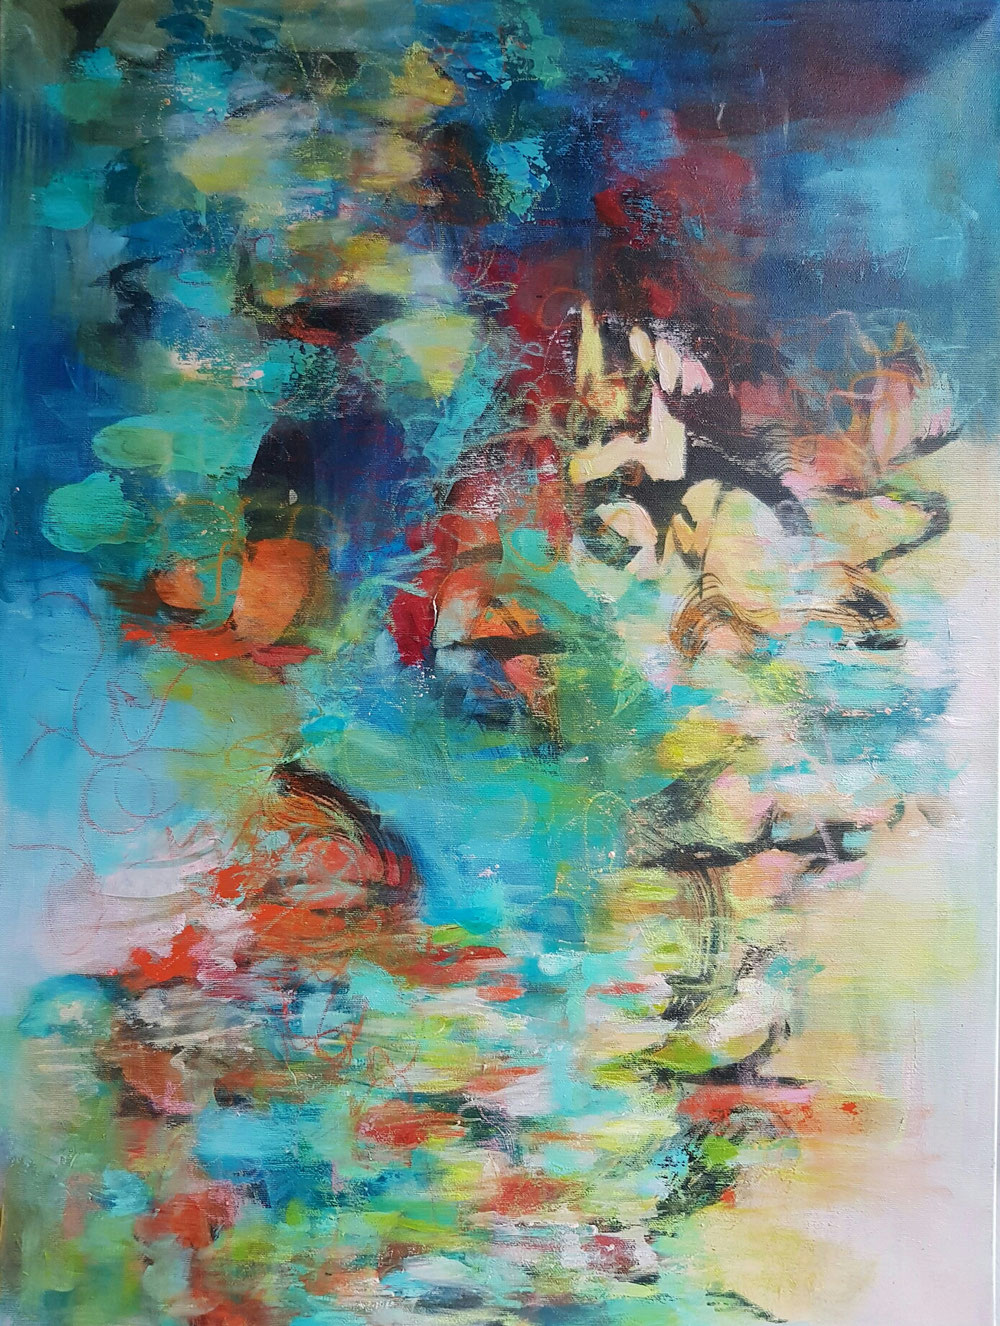 Secret waters, 80 x 60, mixed media on canvas  / private collection